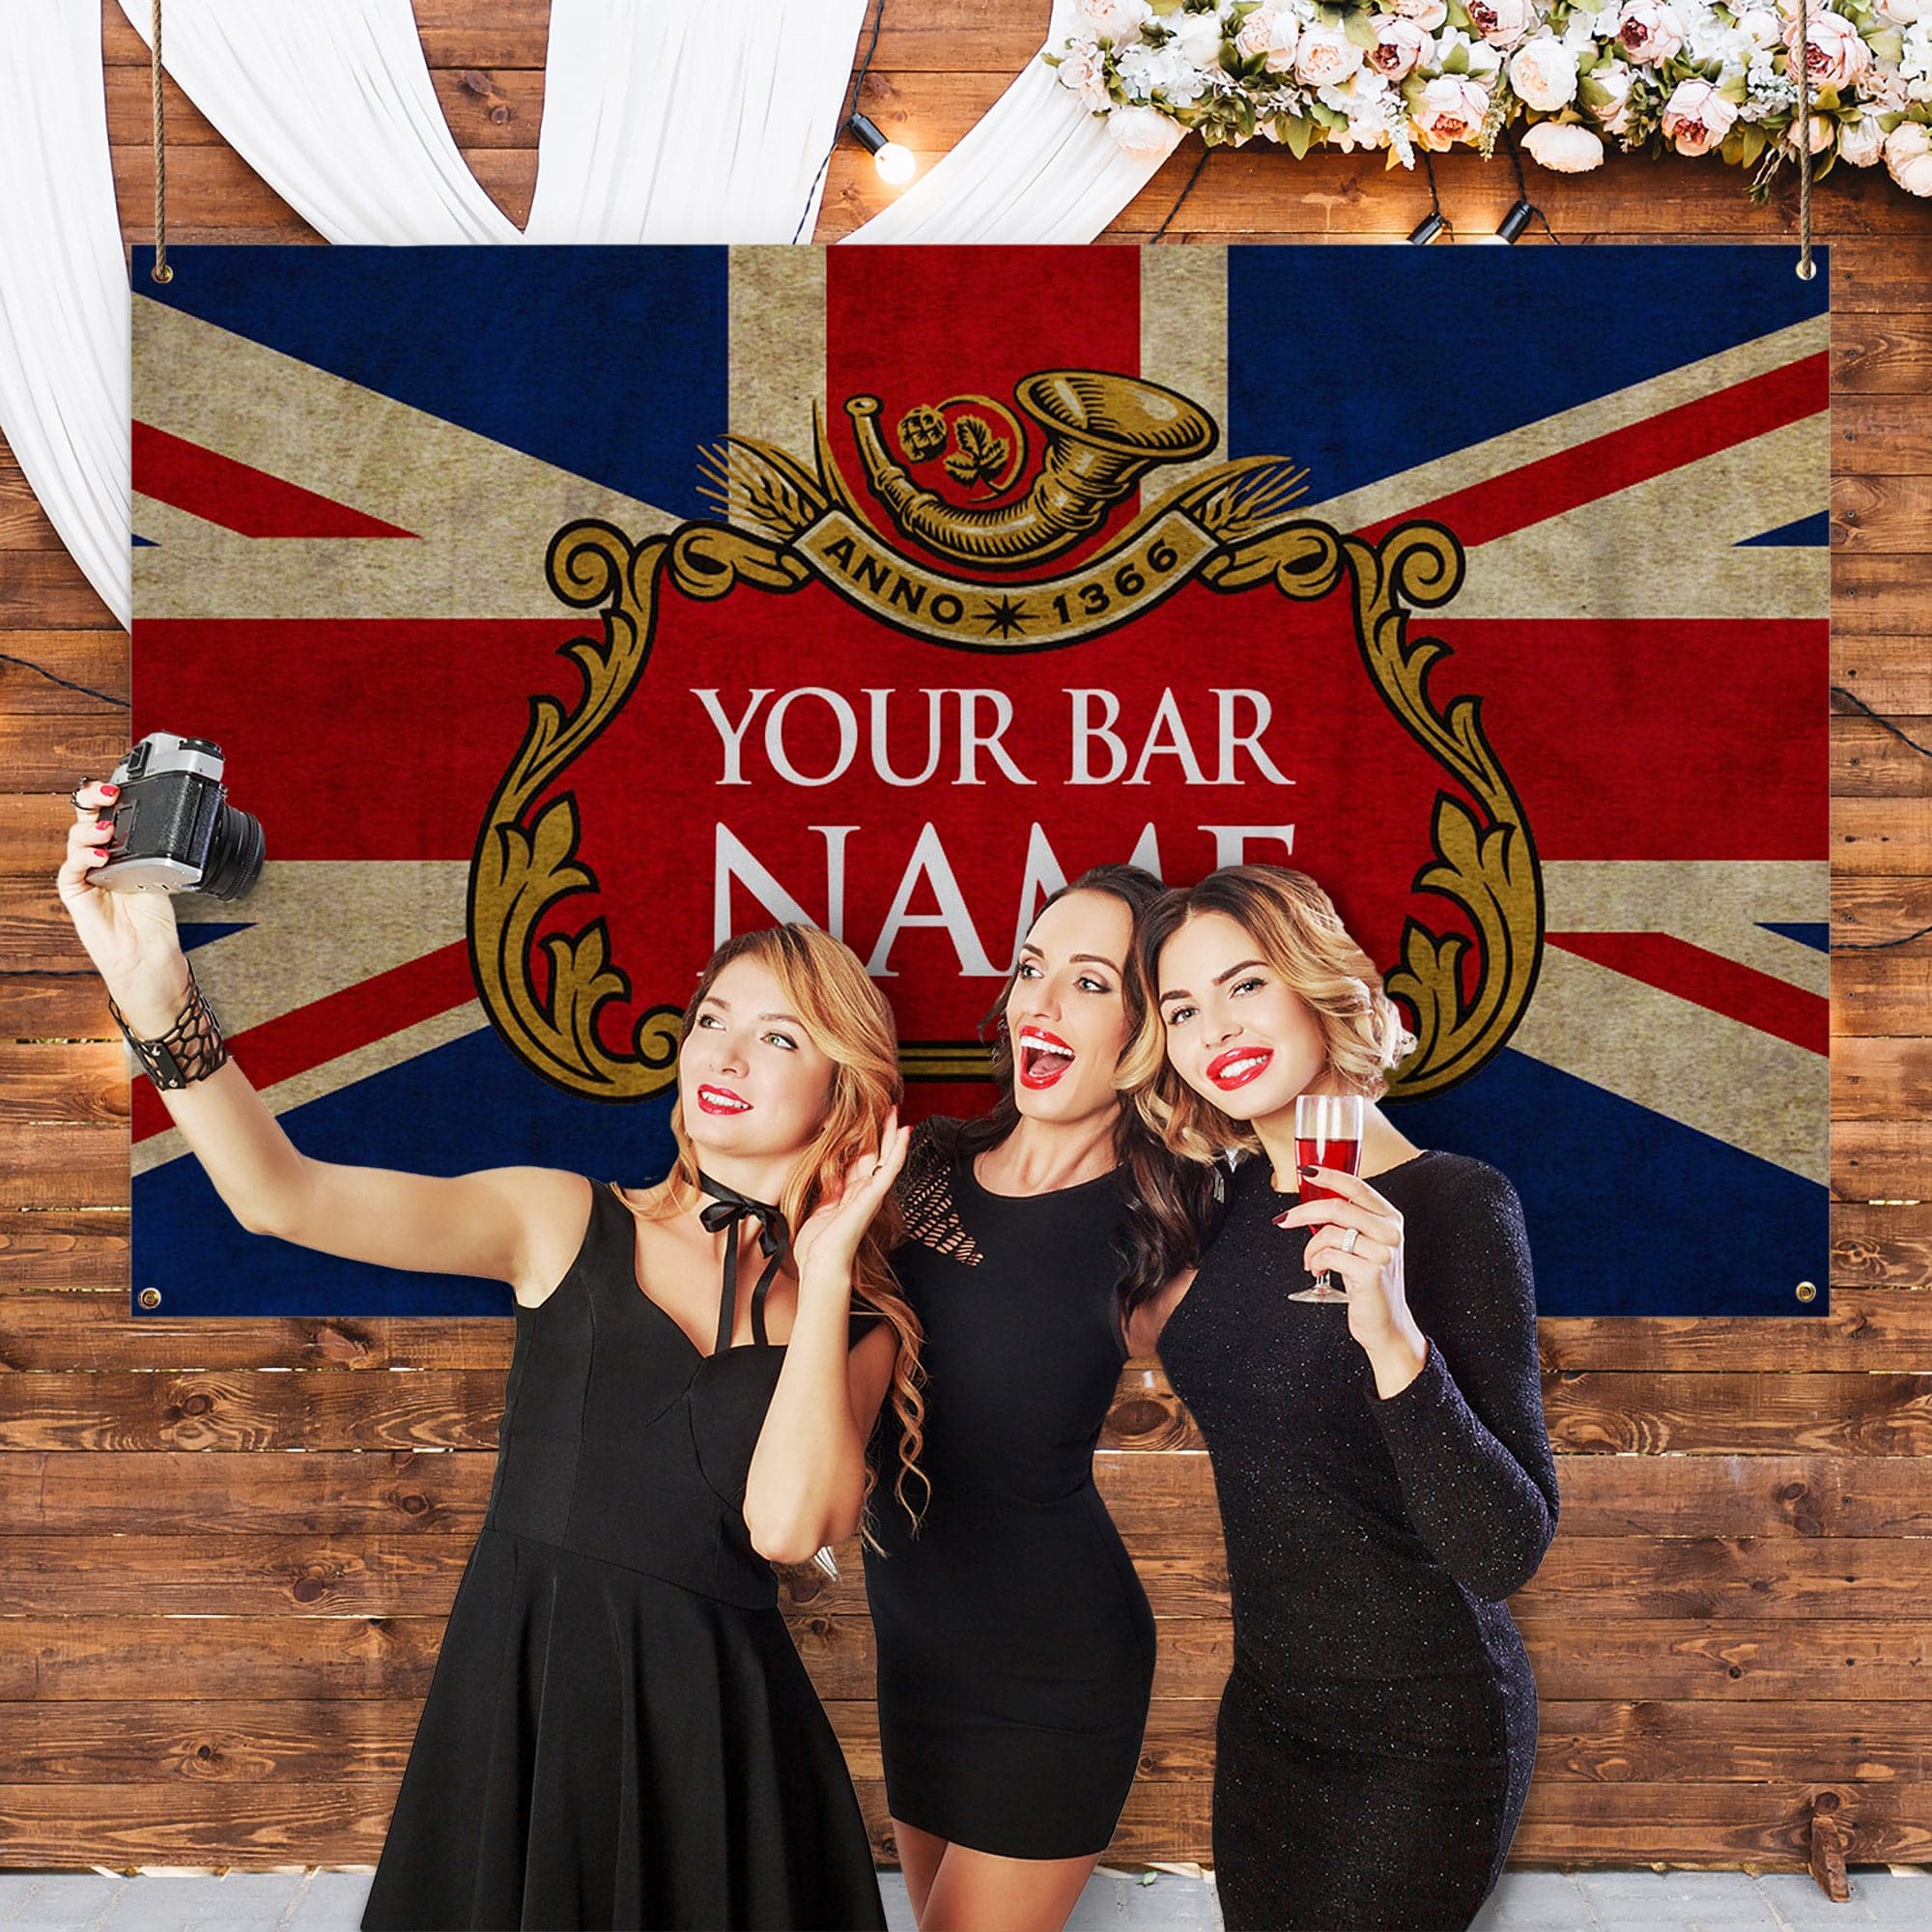 Personalised Beer Label 1 | Union Jack Grunge - Add Any Text - 5ft x 3ft